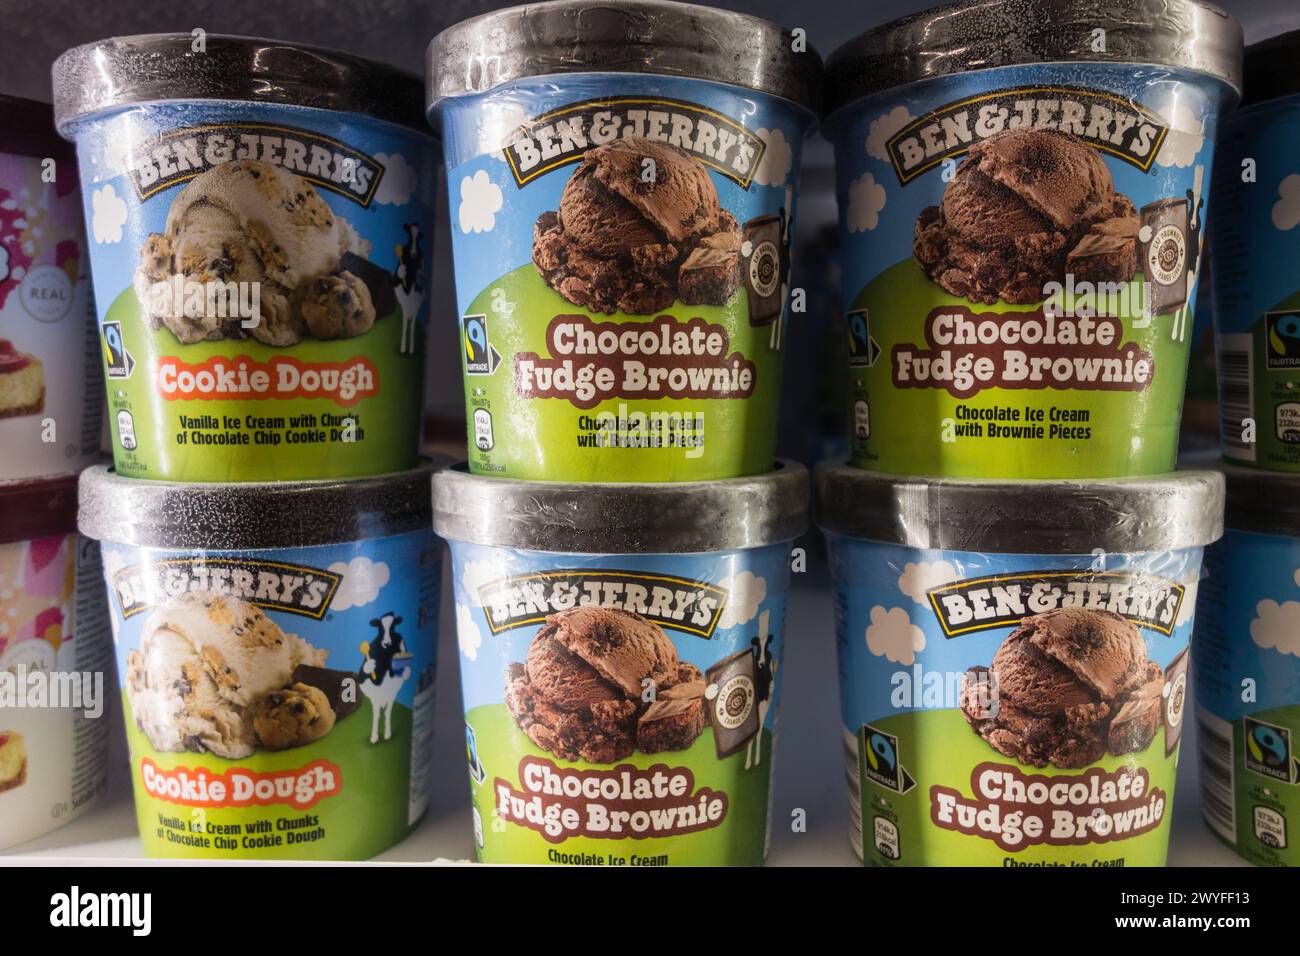 Closeup of Ben & Jerry's Chocolate Fudge Brownie and Cookie Dough ice cream tubs in a supermarket freezer. Unilever Stock Photo